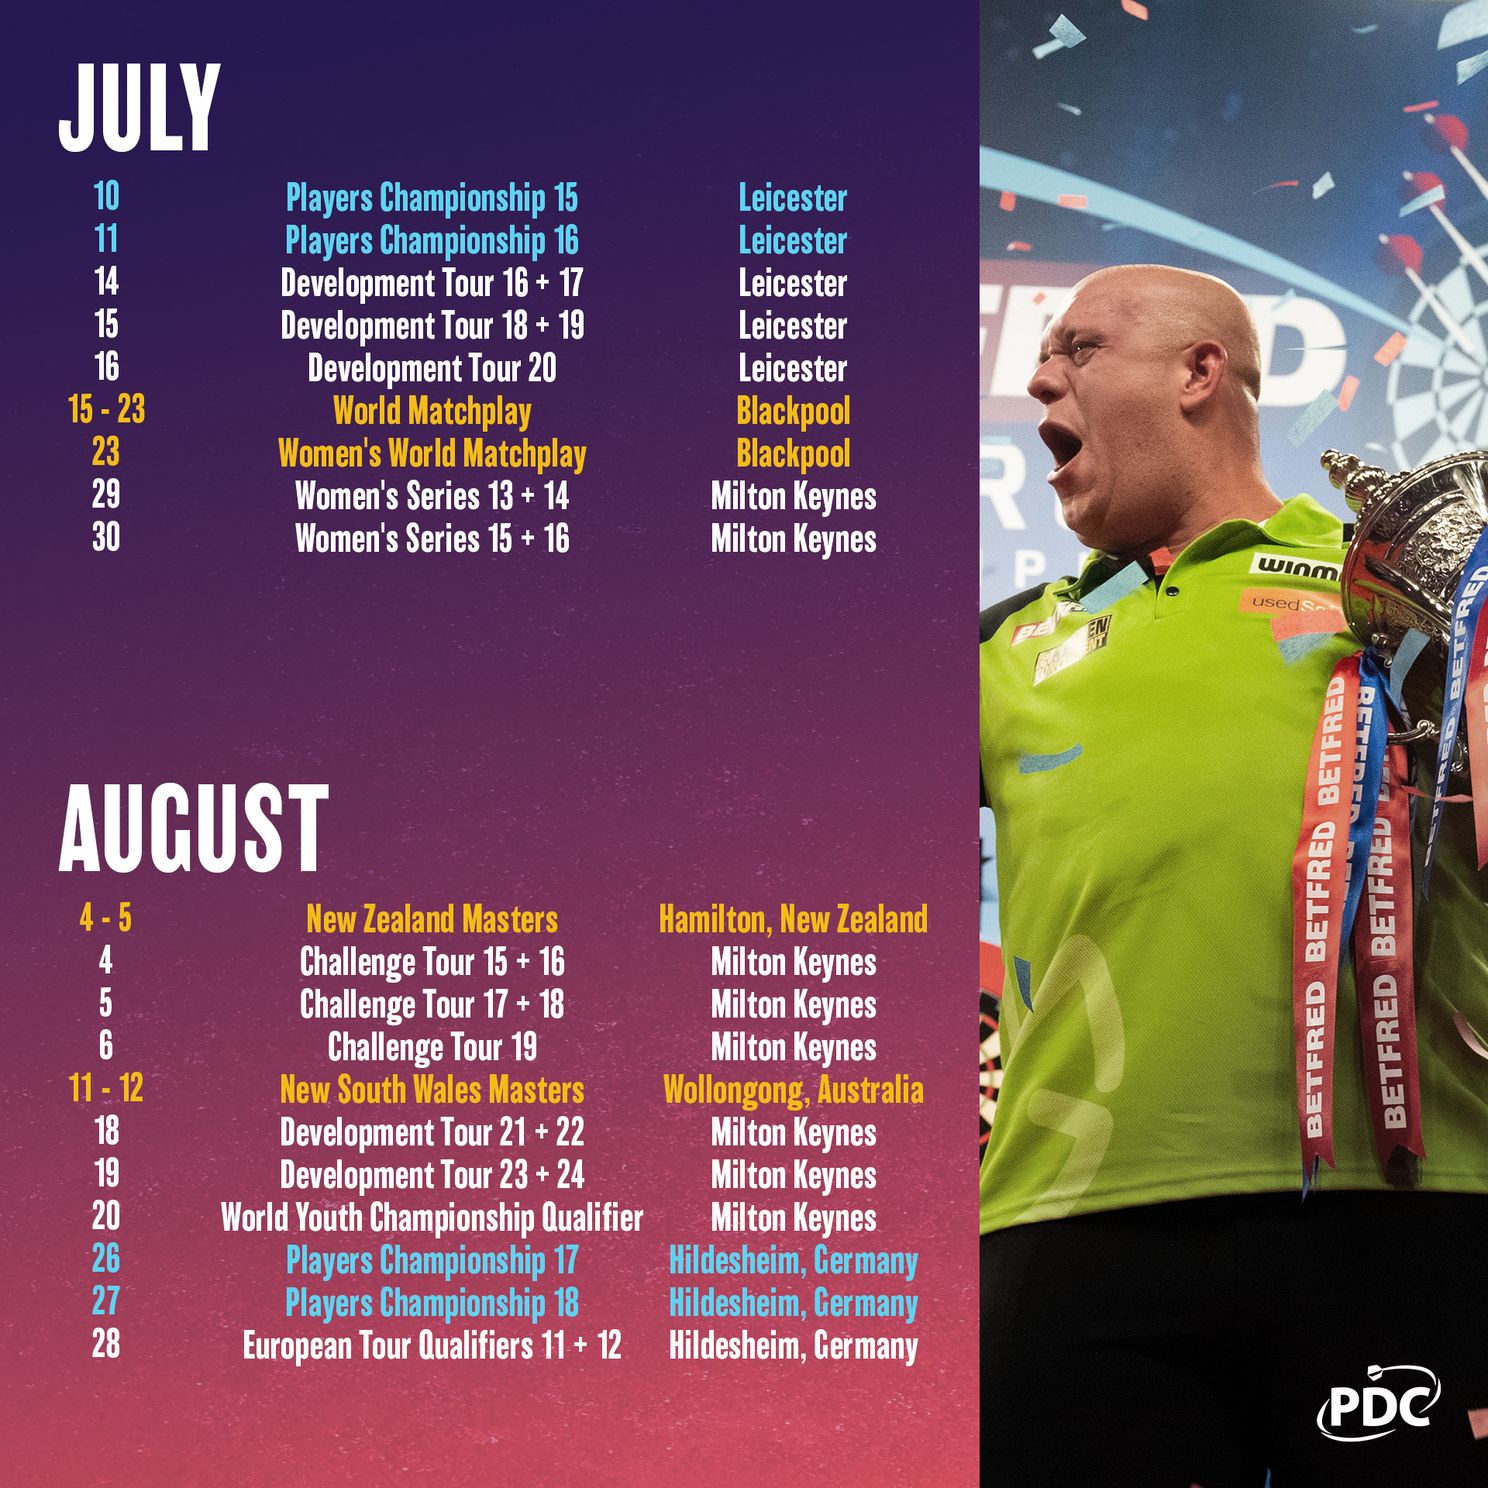 PDC launches darts calendar for 2023 over 170 tournament days in the